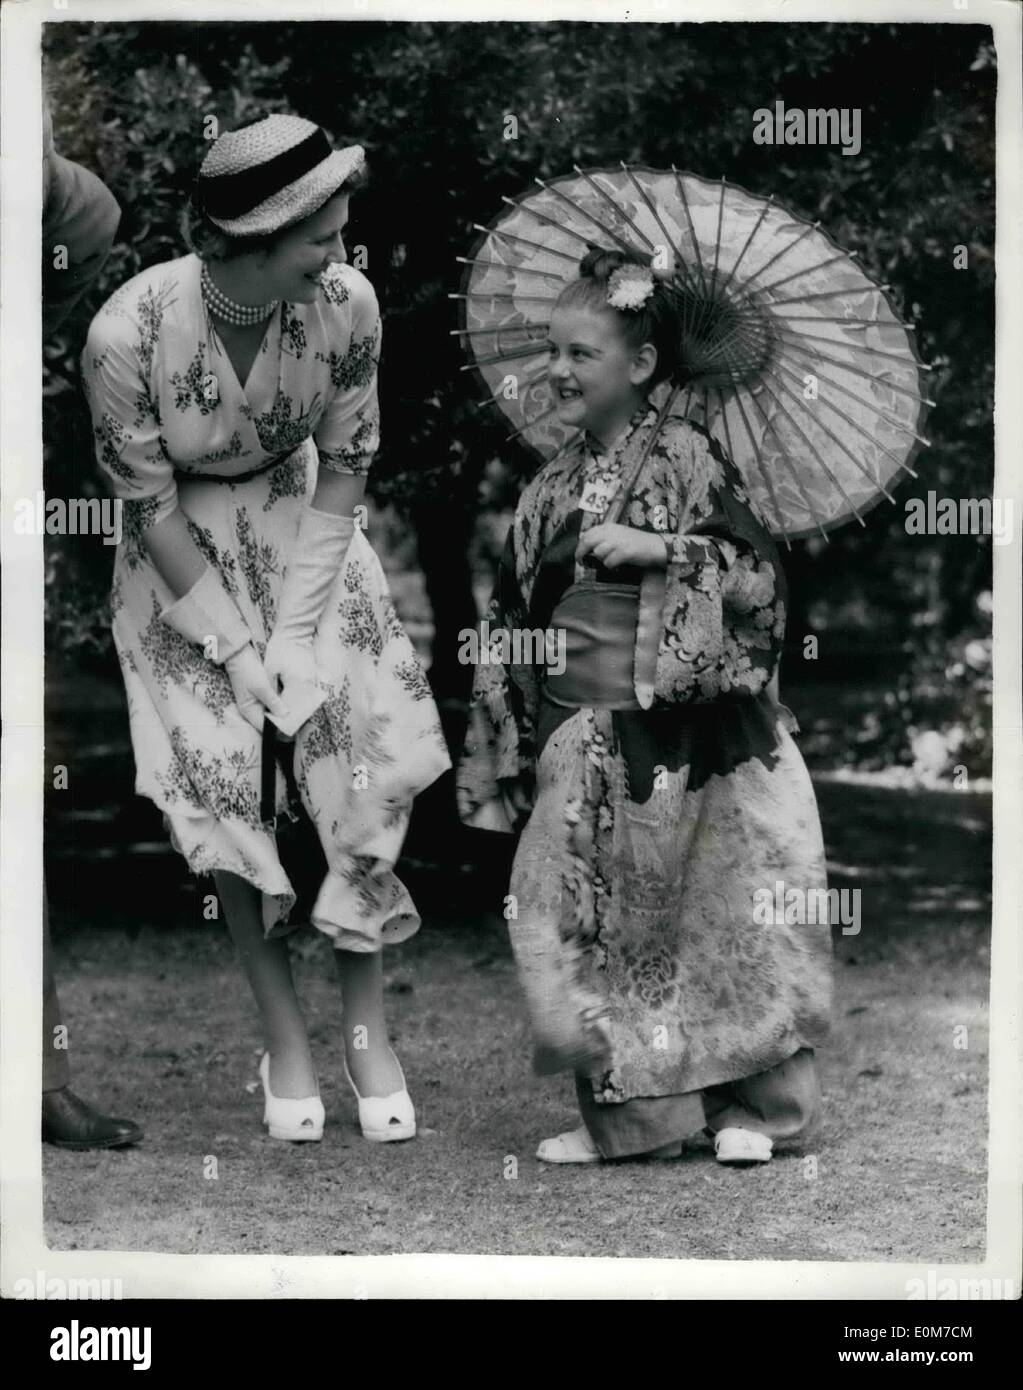 Oct. 10, 1953 - When East Meets West. There's admiration in the smile of Mrs. Christopher Soames, daughter of Sir Winston Churchill, as she inspects a gaily coloured Japanese outfit, complete with parasol.The outfit won a fancy dress prize at the Hastings and Rye Conservatives garden fete at St. Leonards, during the week end. Stock Photo